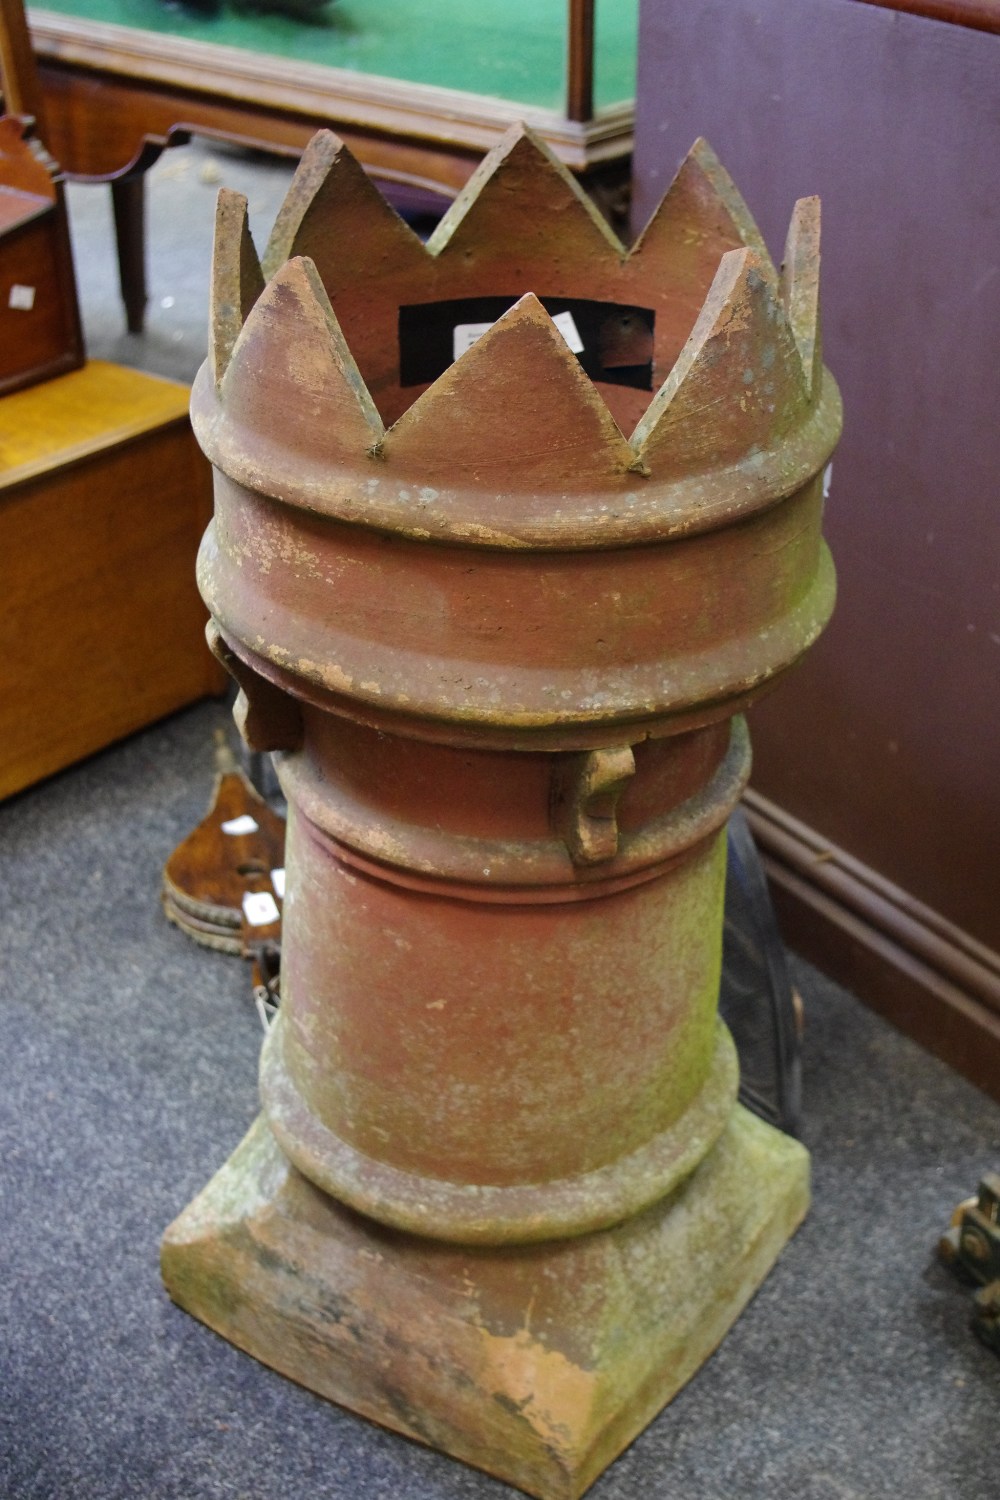 An early 20th century terracotta King's chimney pot, c.